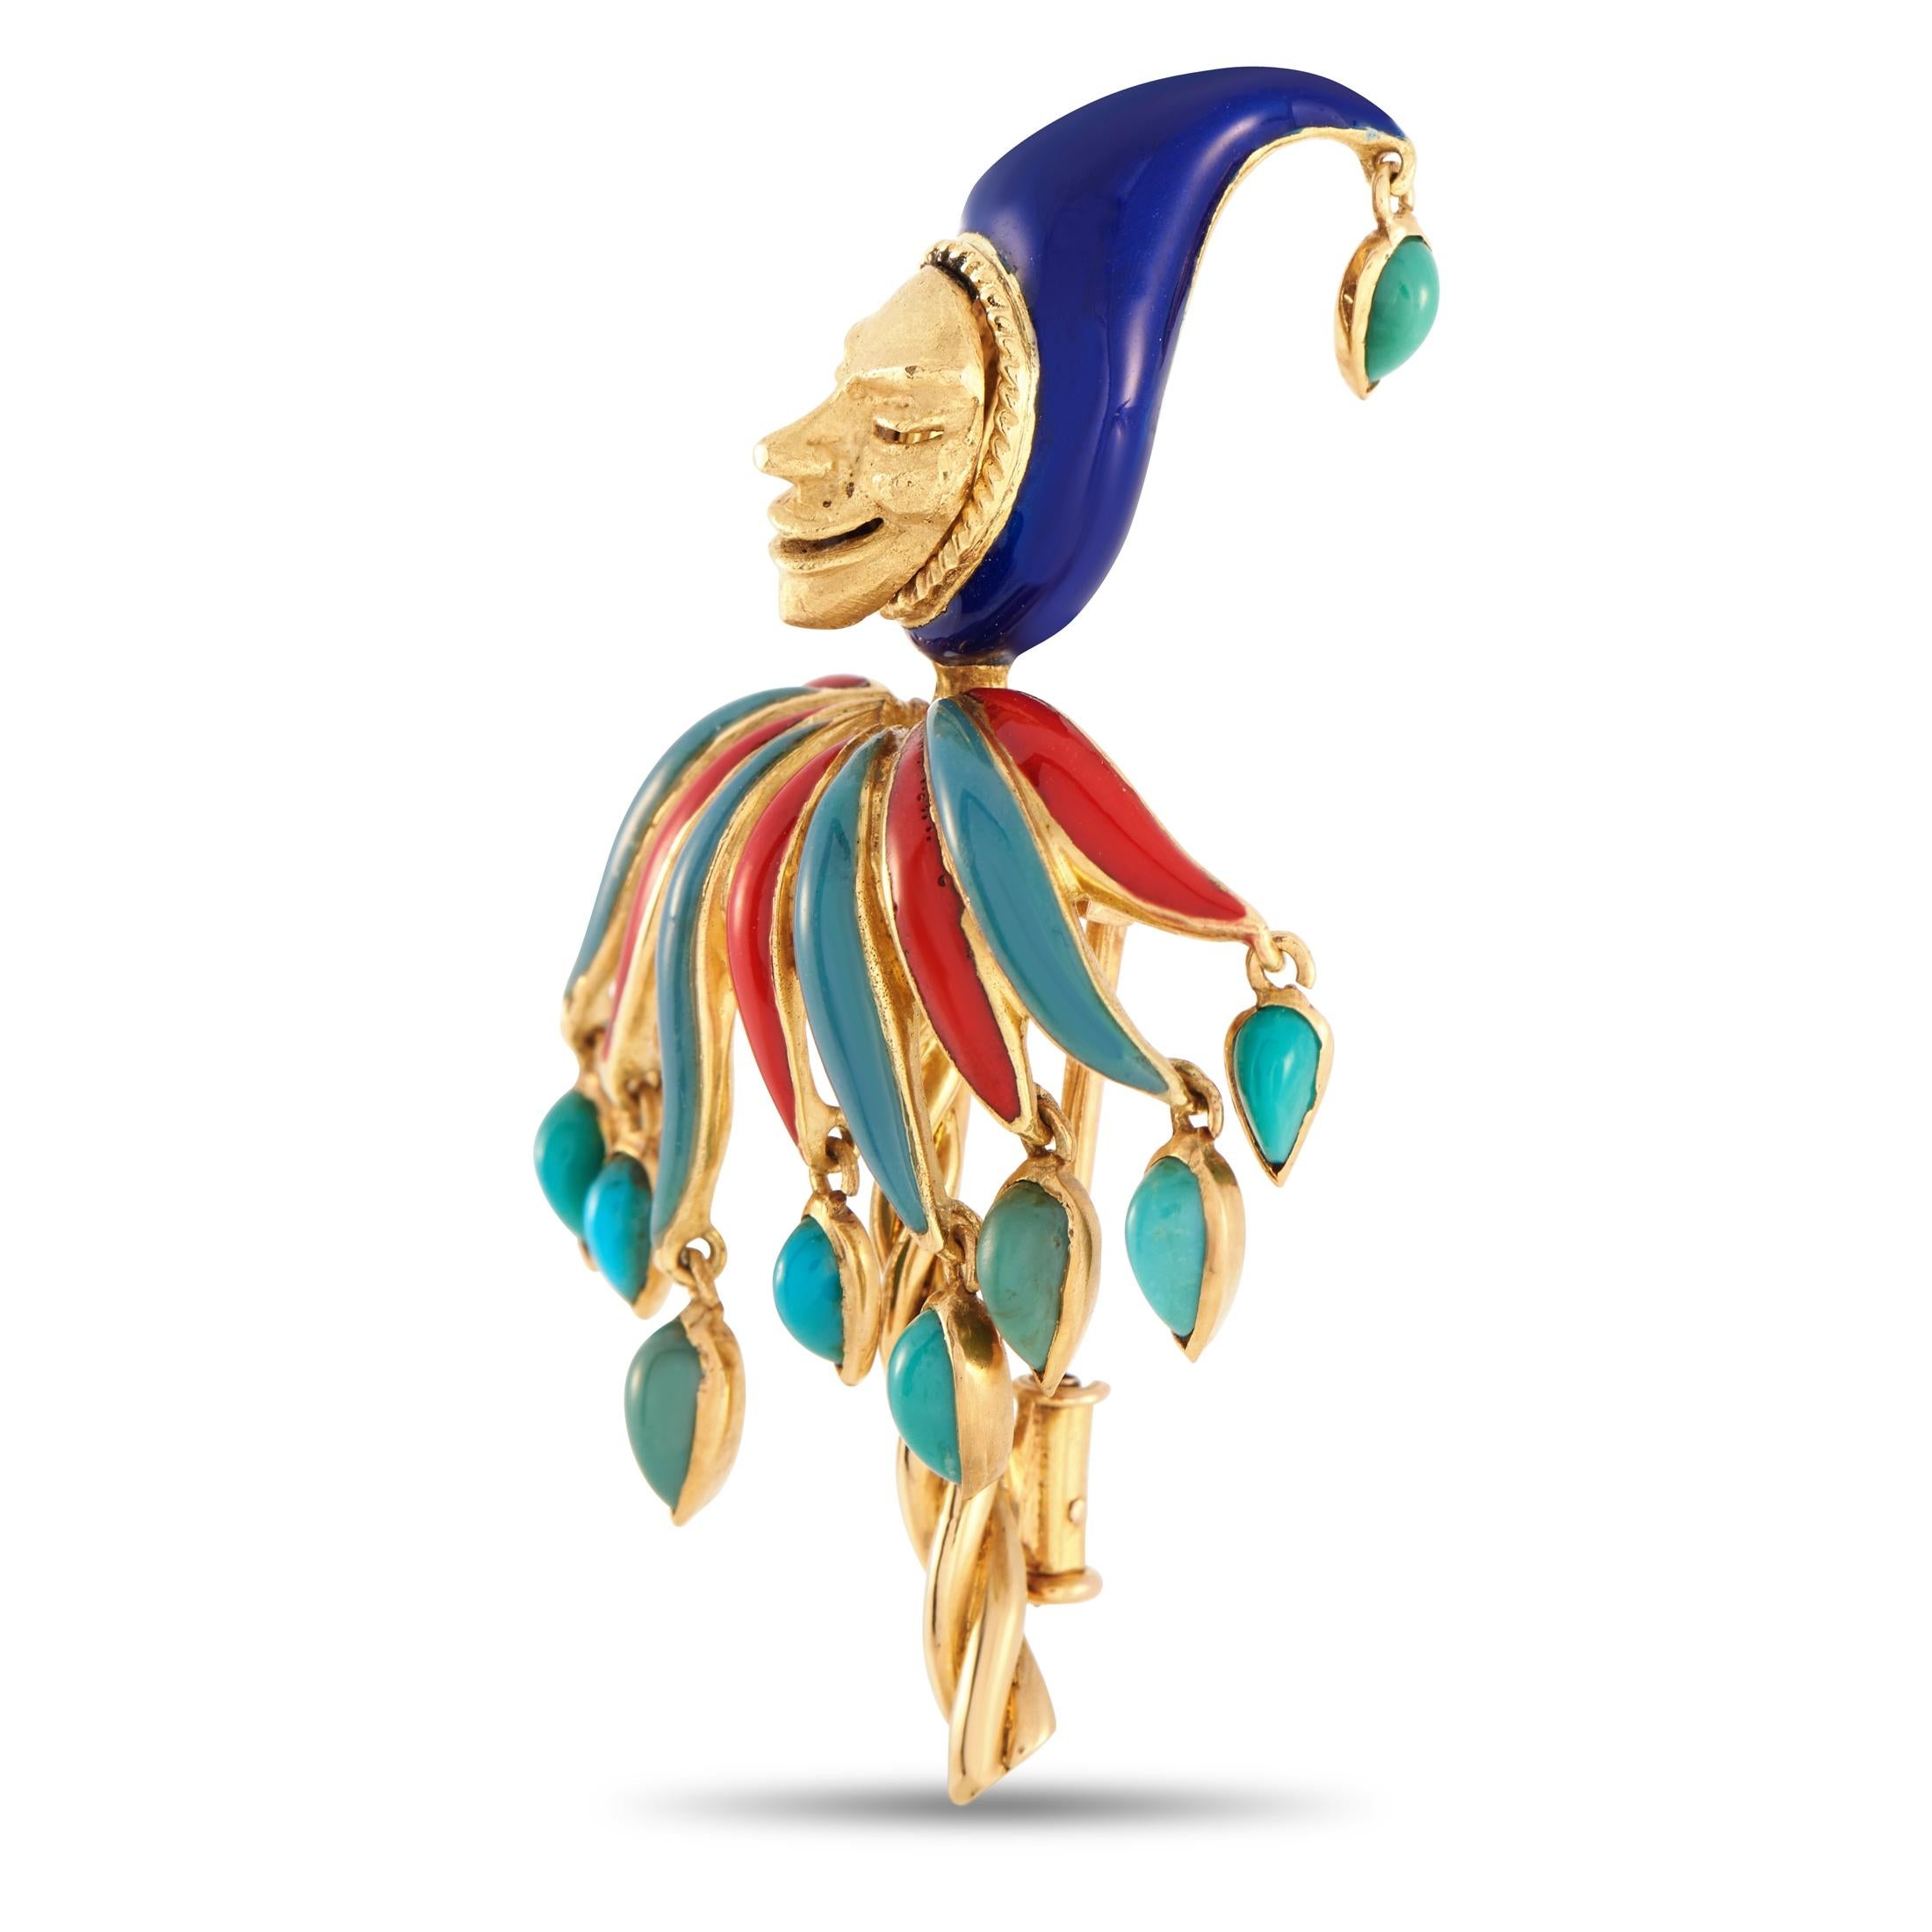 This vintage piece from Cartier possesses a whimsical sense of old-fashioned elegance. Shaped to resemble a jester, it’s crafted from 18K Yellow Gold and accented by an array of colorful accents. Add charm to any outfit by adding this brooch, which